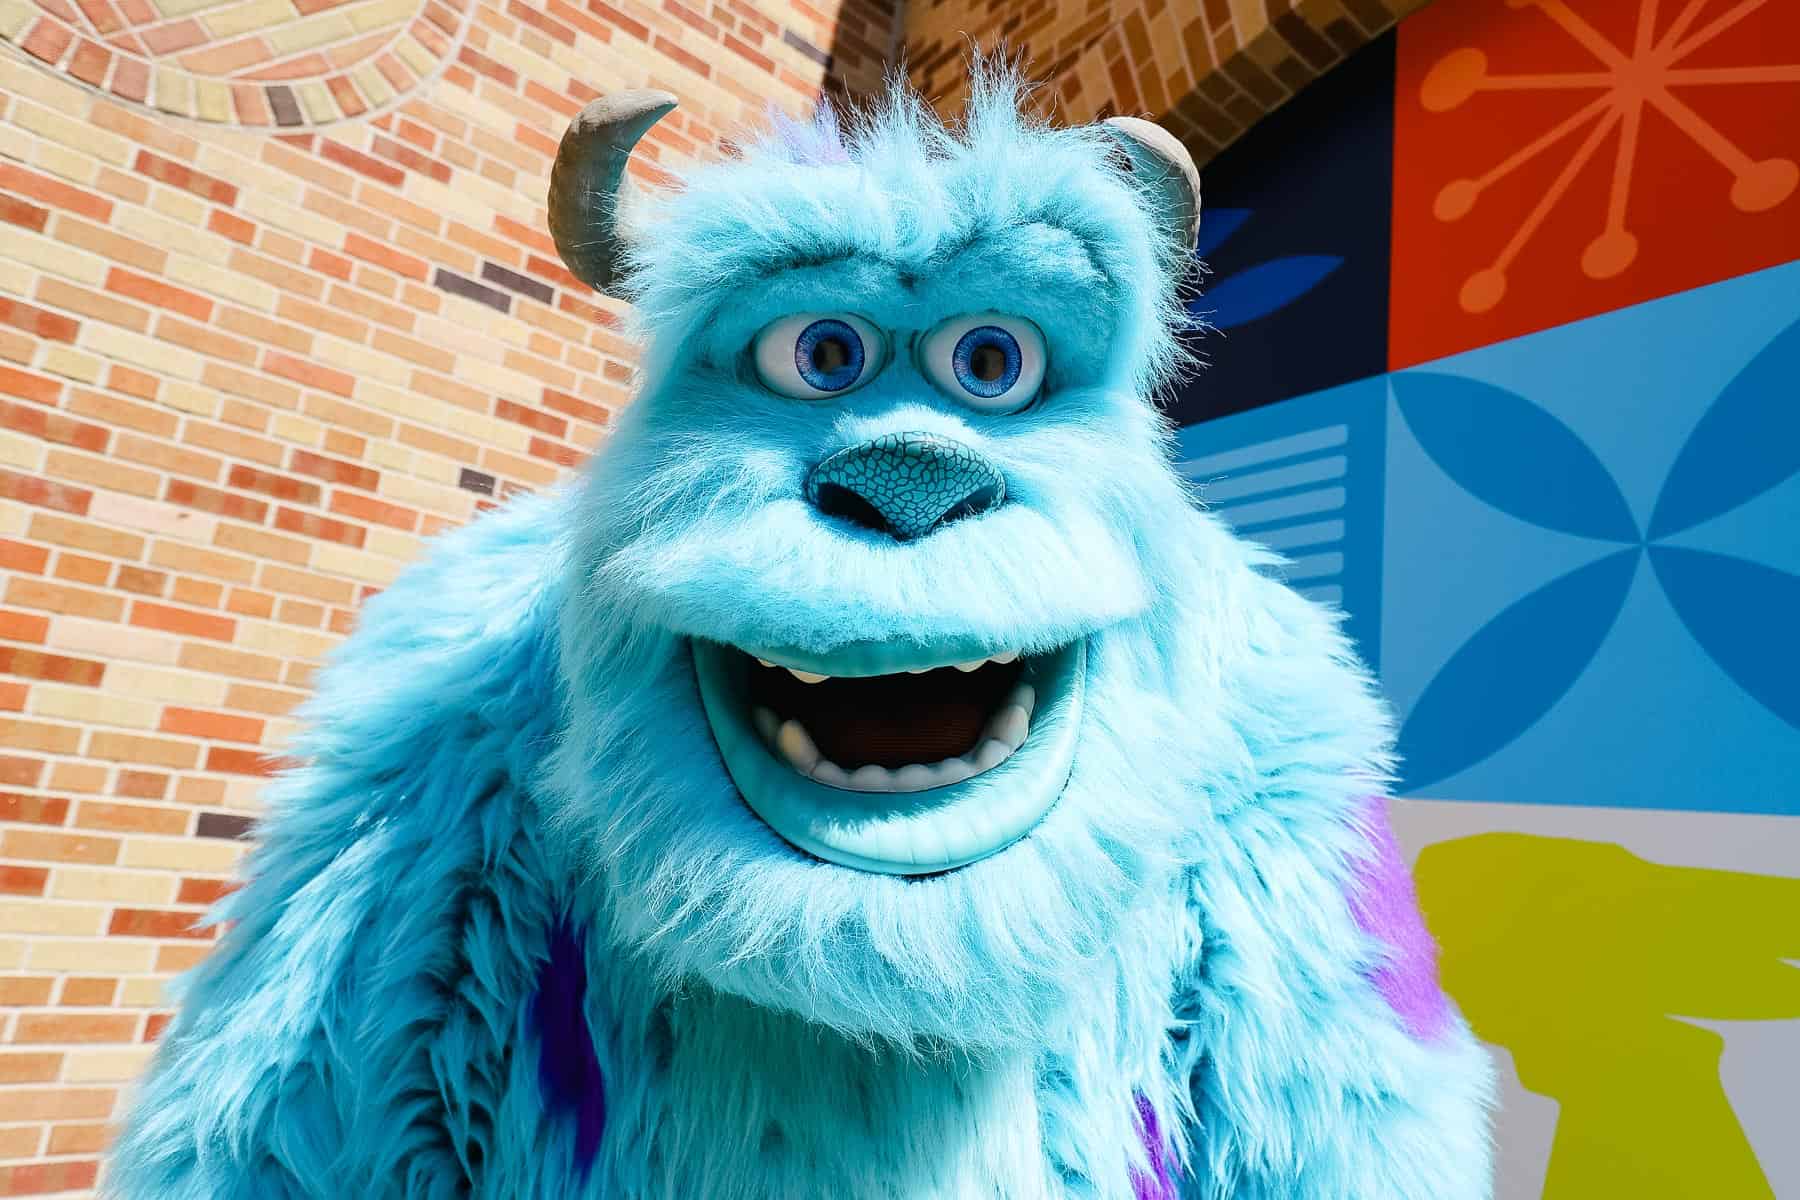 Meet Sulley from Monsters, Inc.